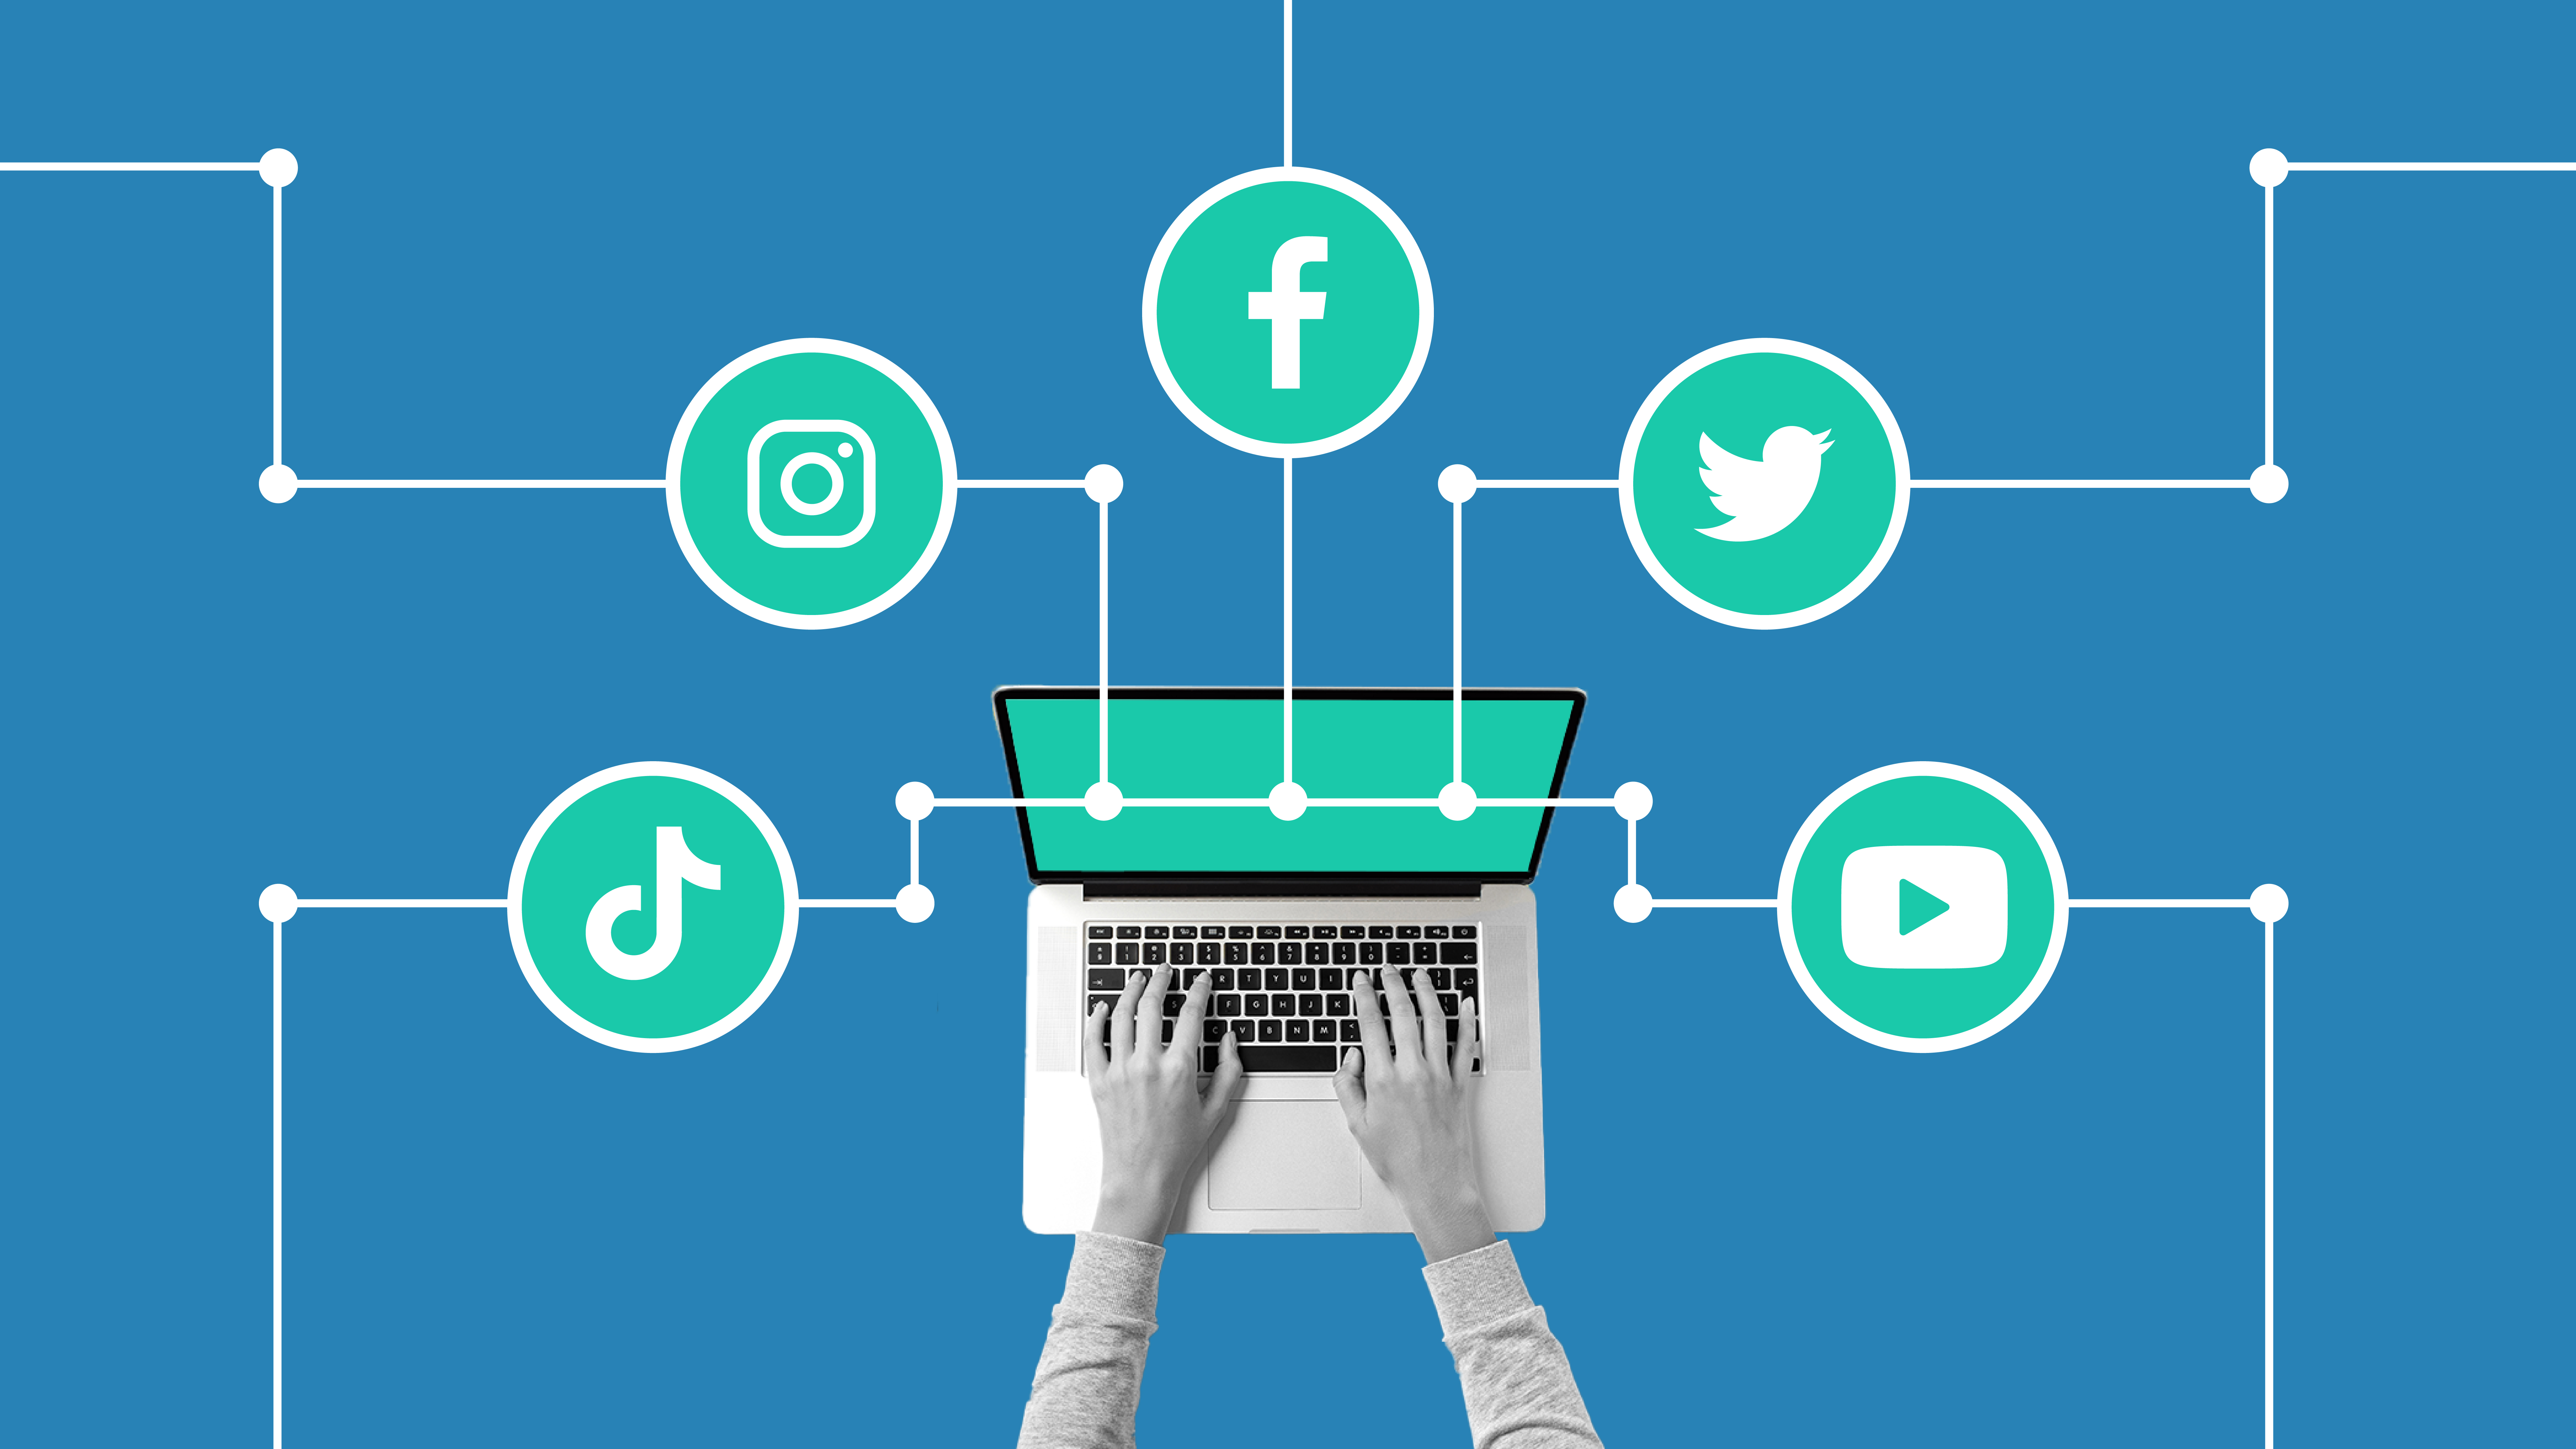 This image has a blue background. There is a laptop in the center of the screen, with lines connecting logos from some popular social media platforms. This image represents the social media algorithms.